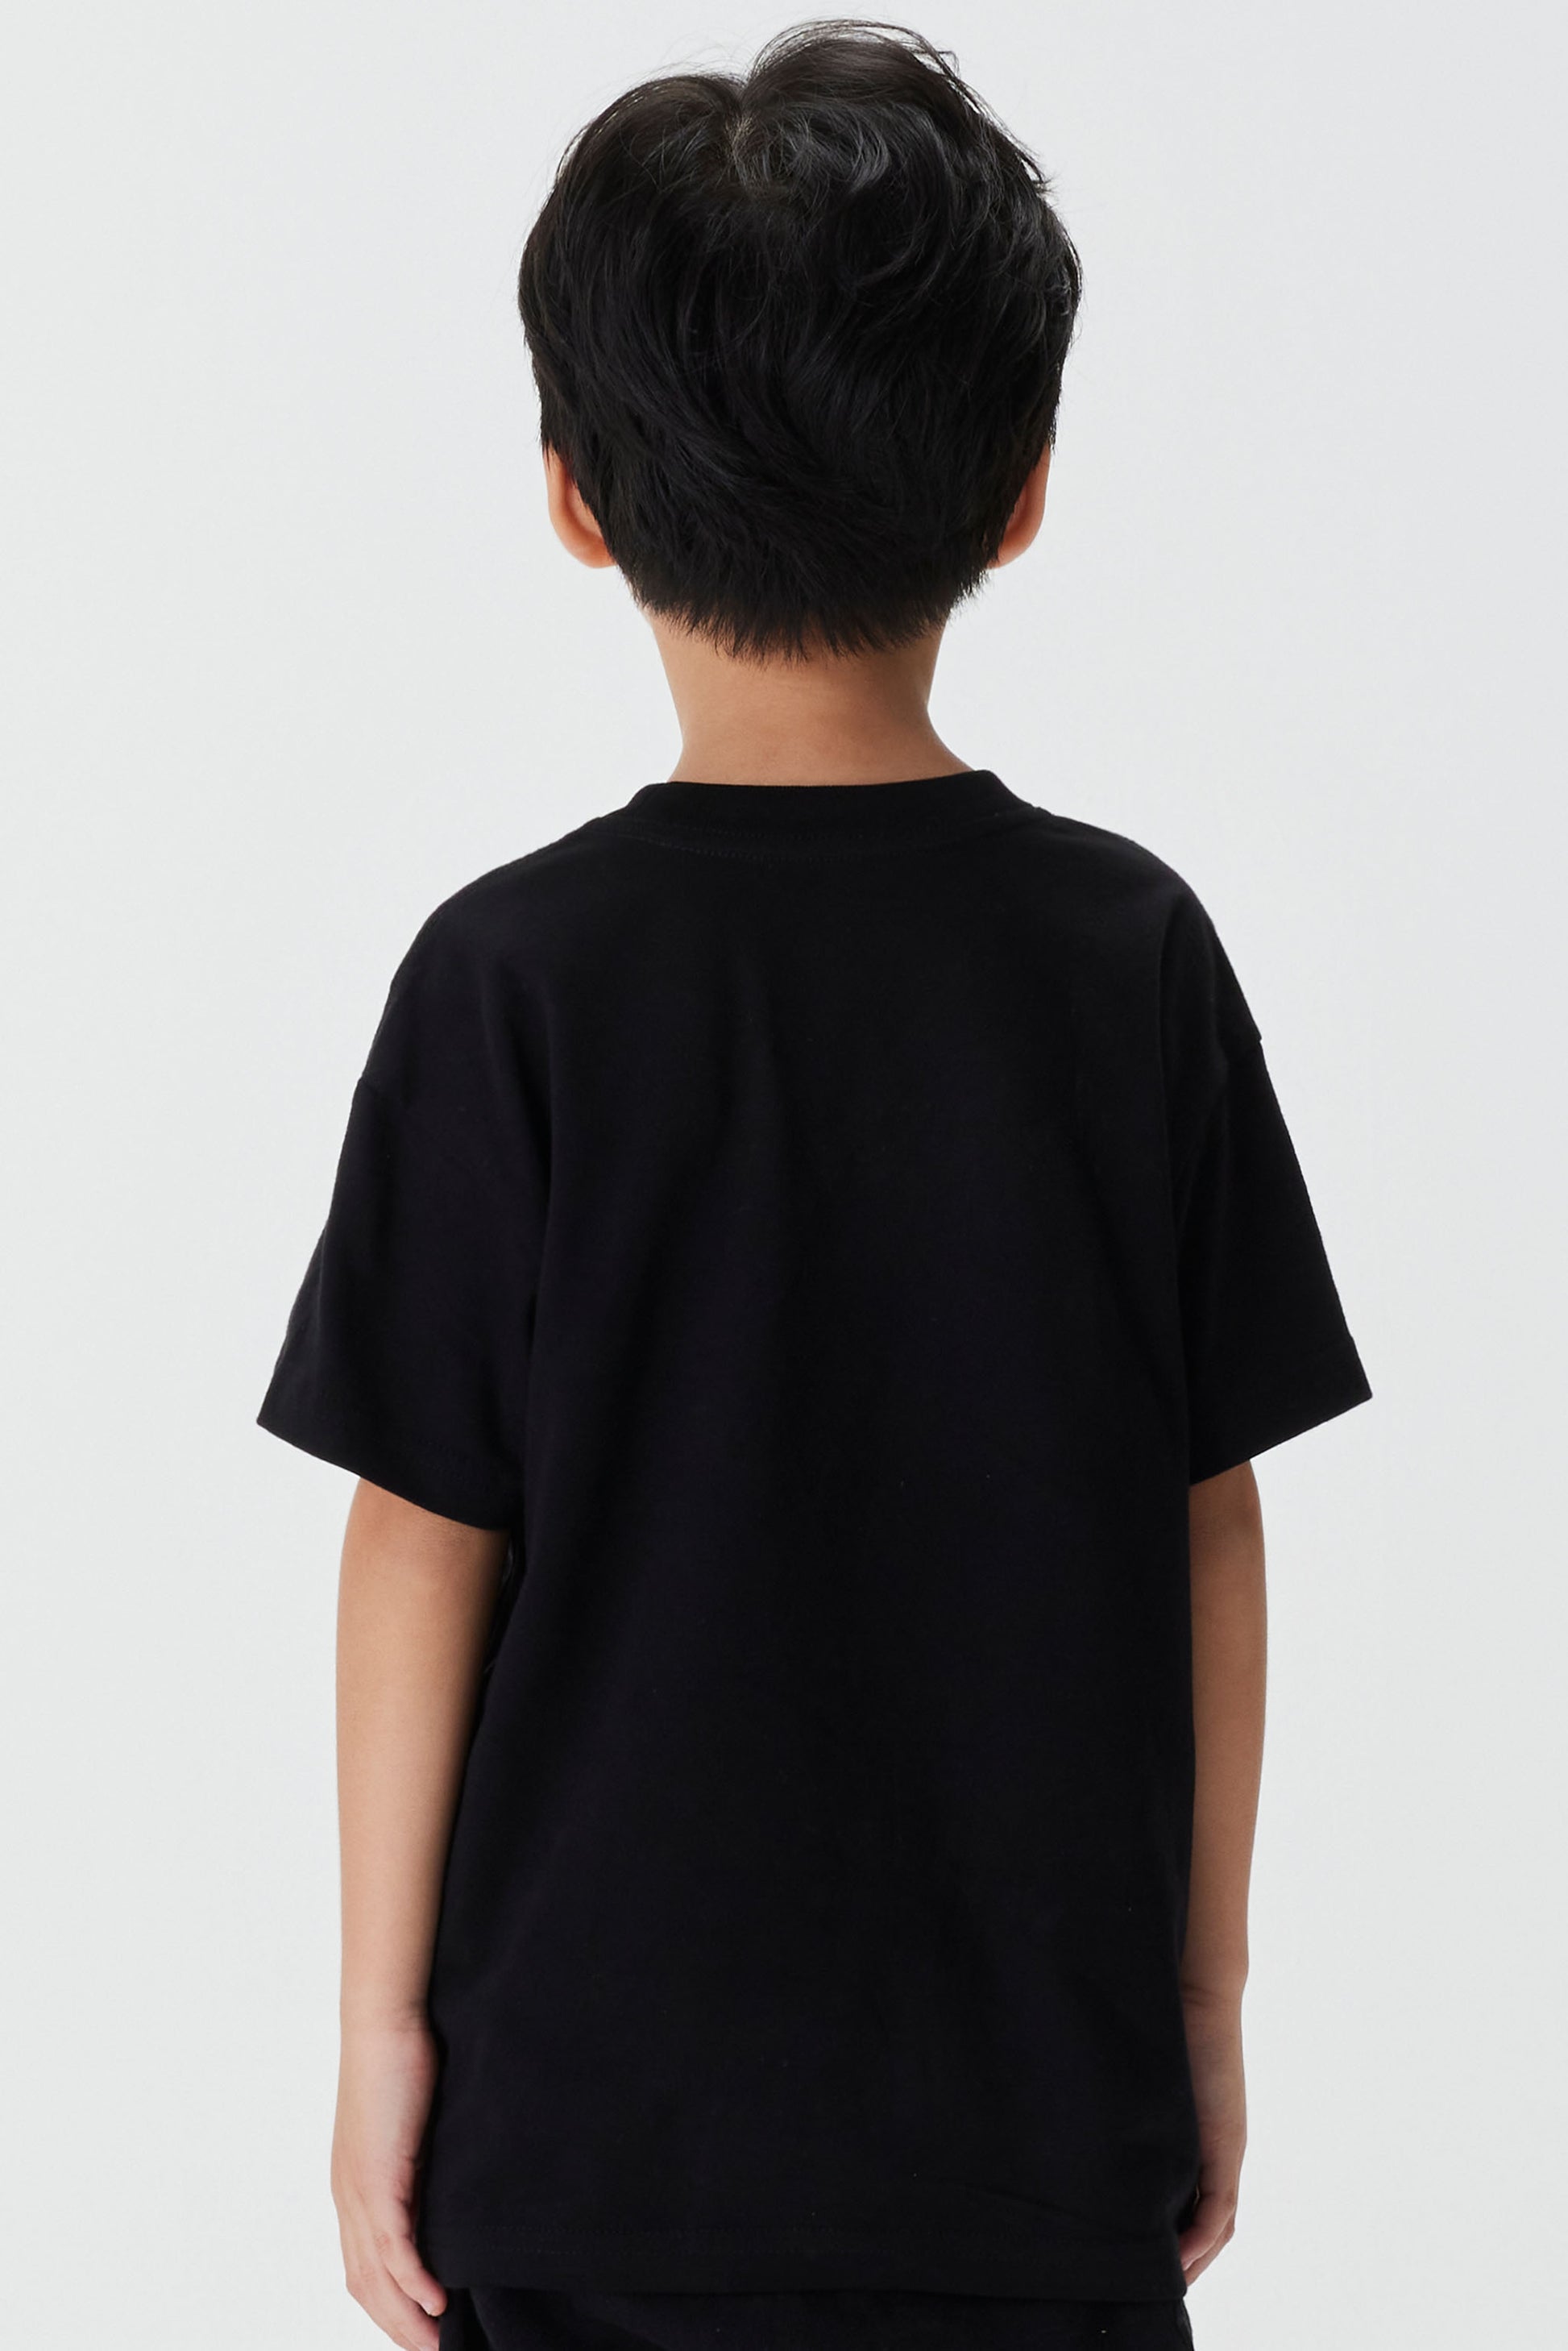 KIDS REFLECTIVE - S/SLEEVE PANTHER BLACK – TEE